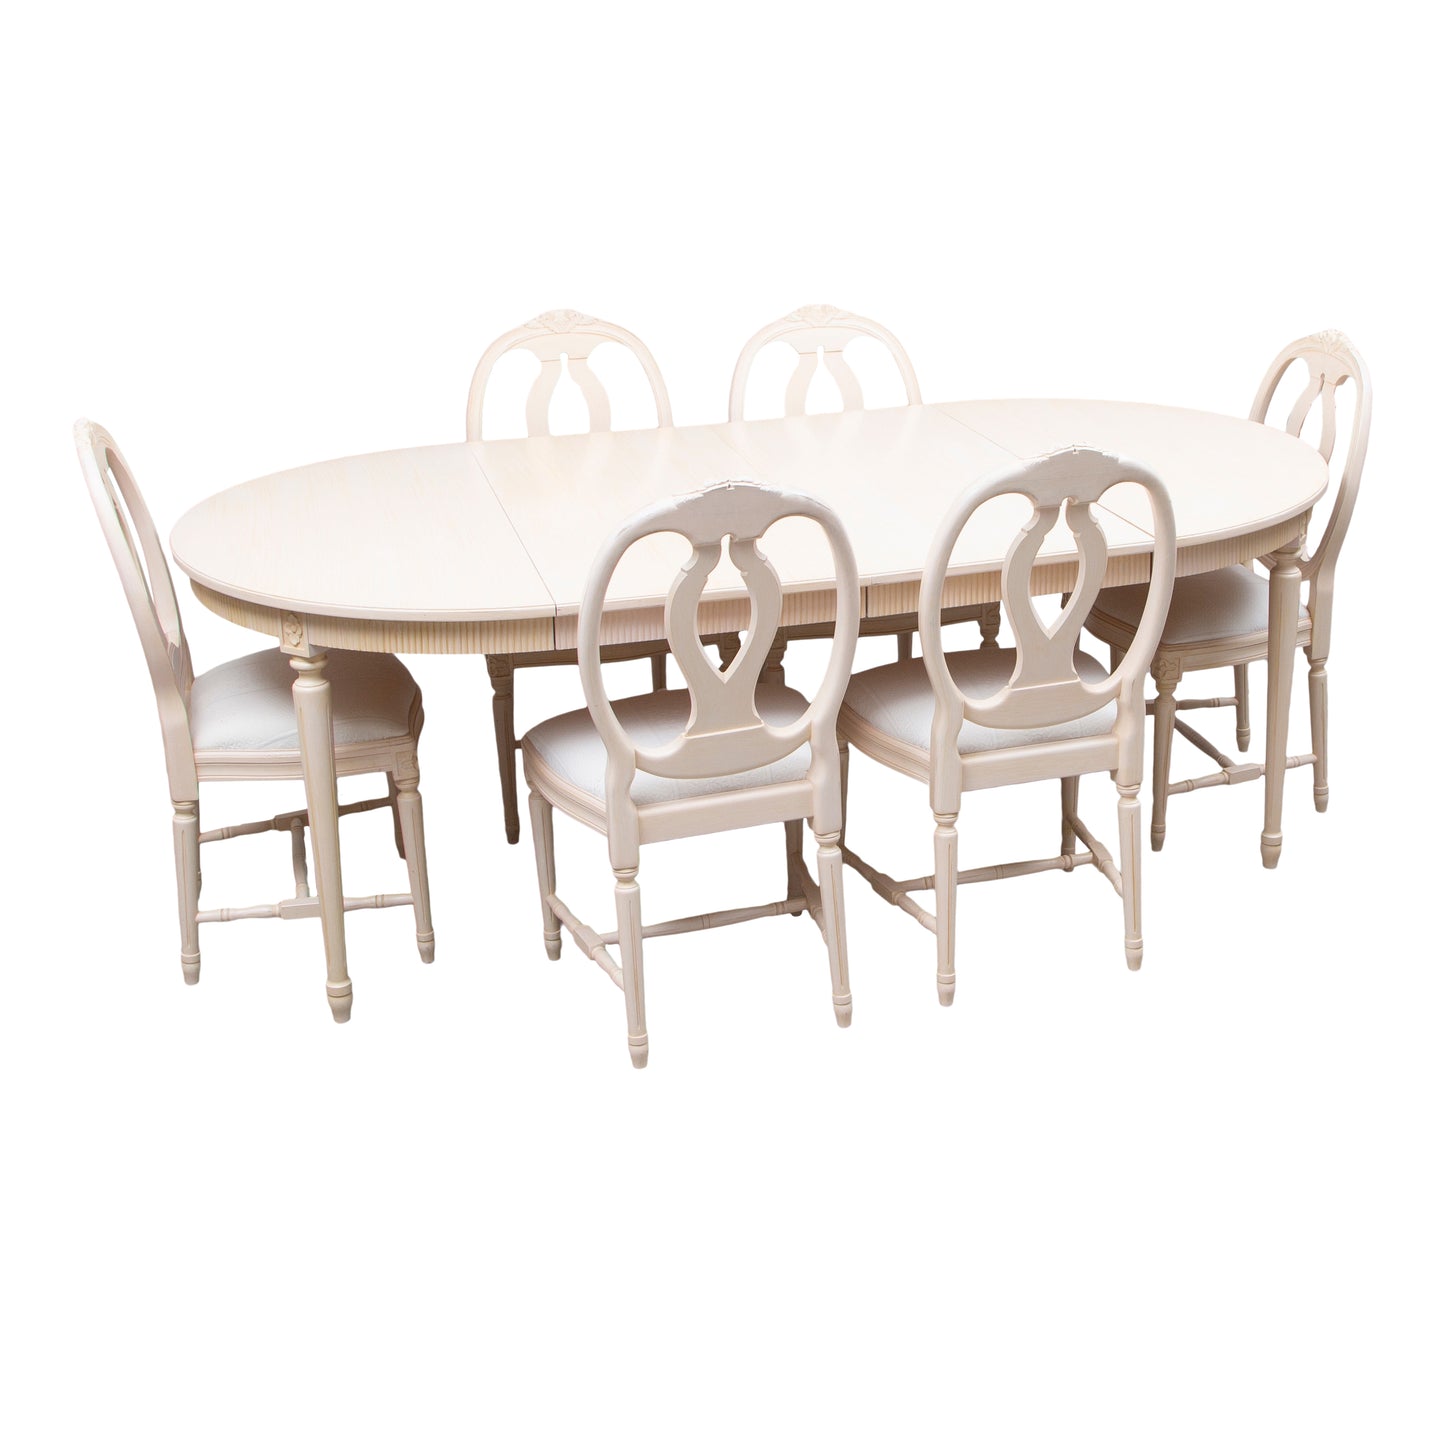 1990s Gustavian Dining Furniture- Set of 6 chairs plus table and leaves